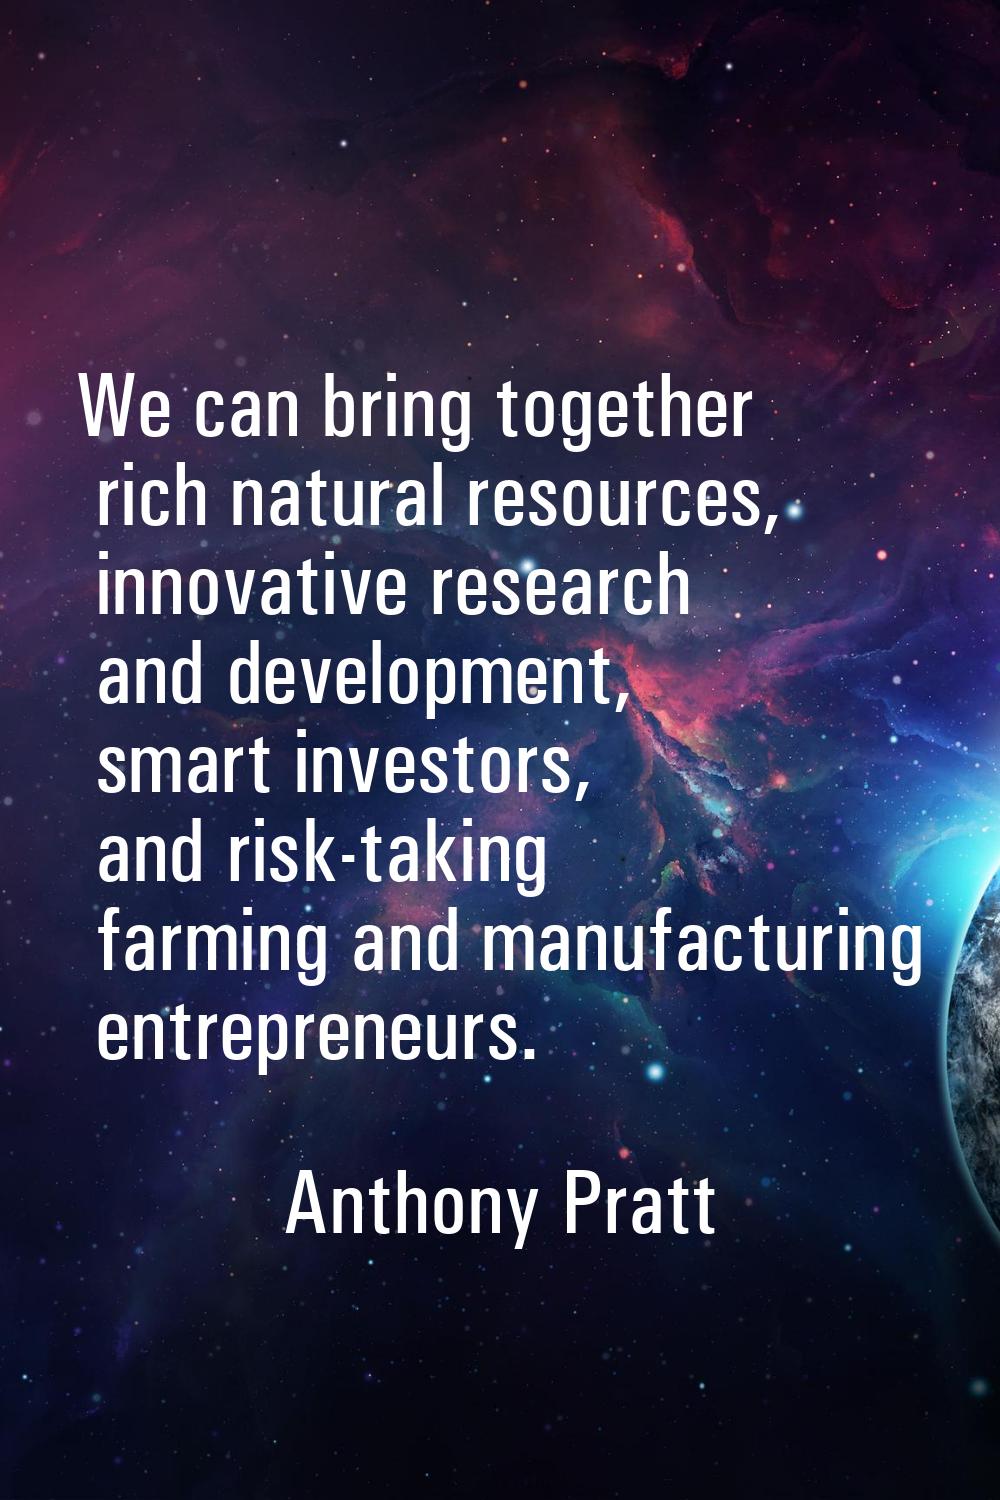 We can bring together rich natural resources, innovative research and development, smart investors,